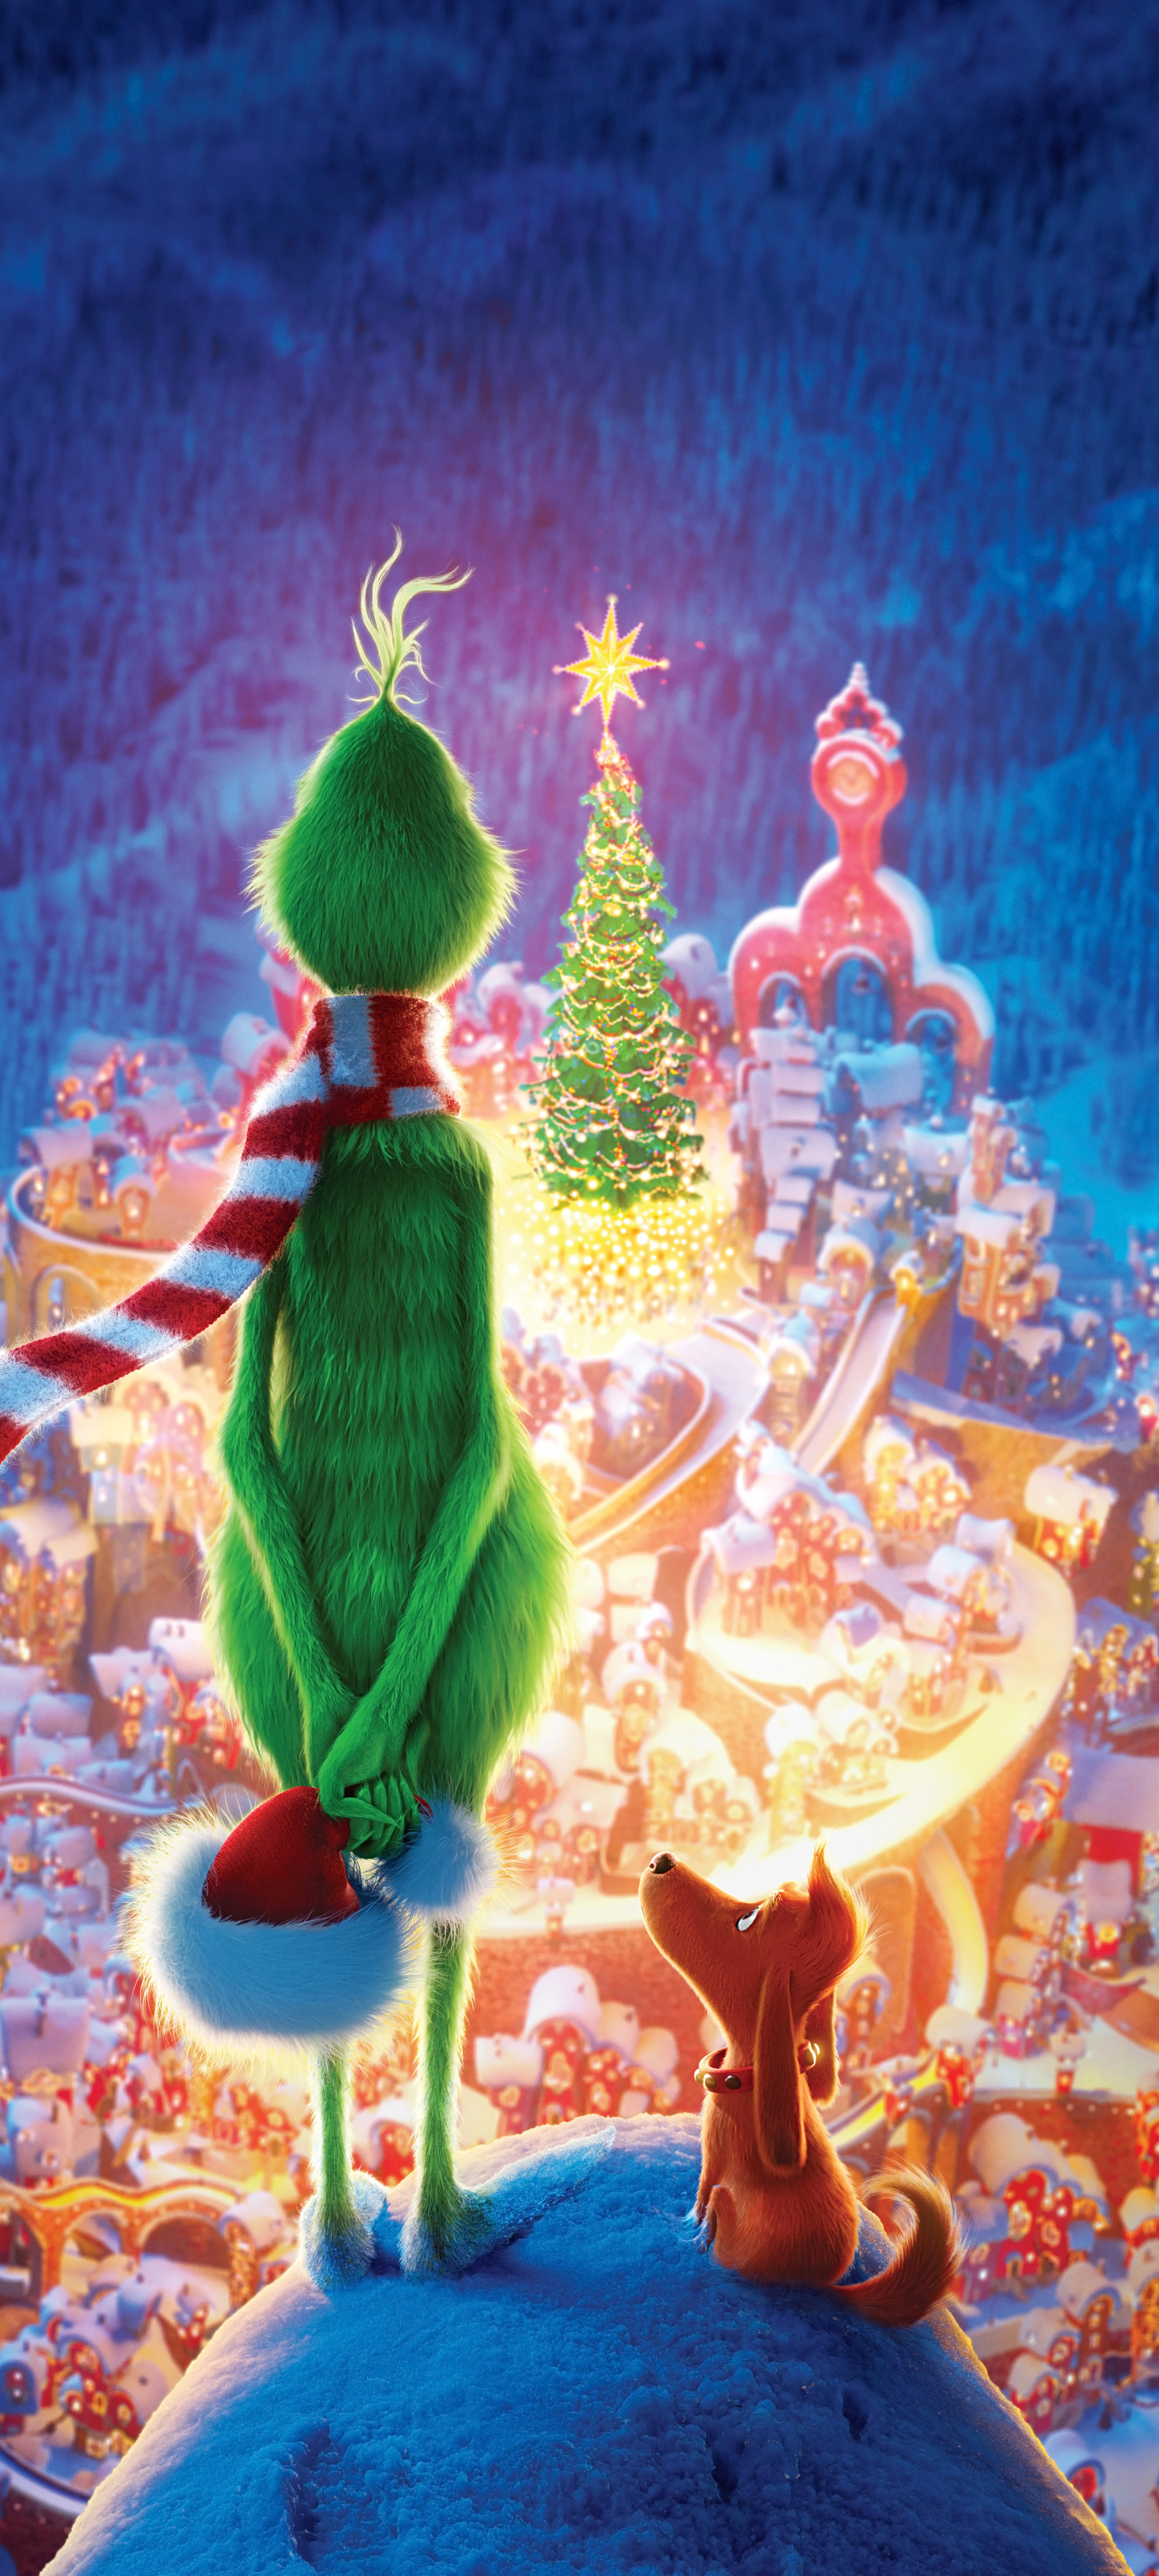 HD wallpaper how the grinch stole christmas pictures to download animal   Wallpaper Flare